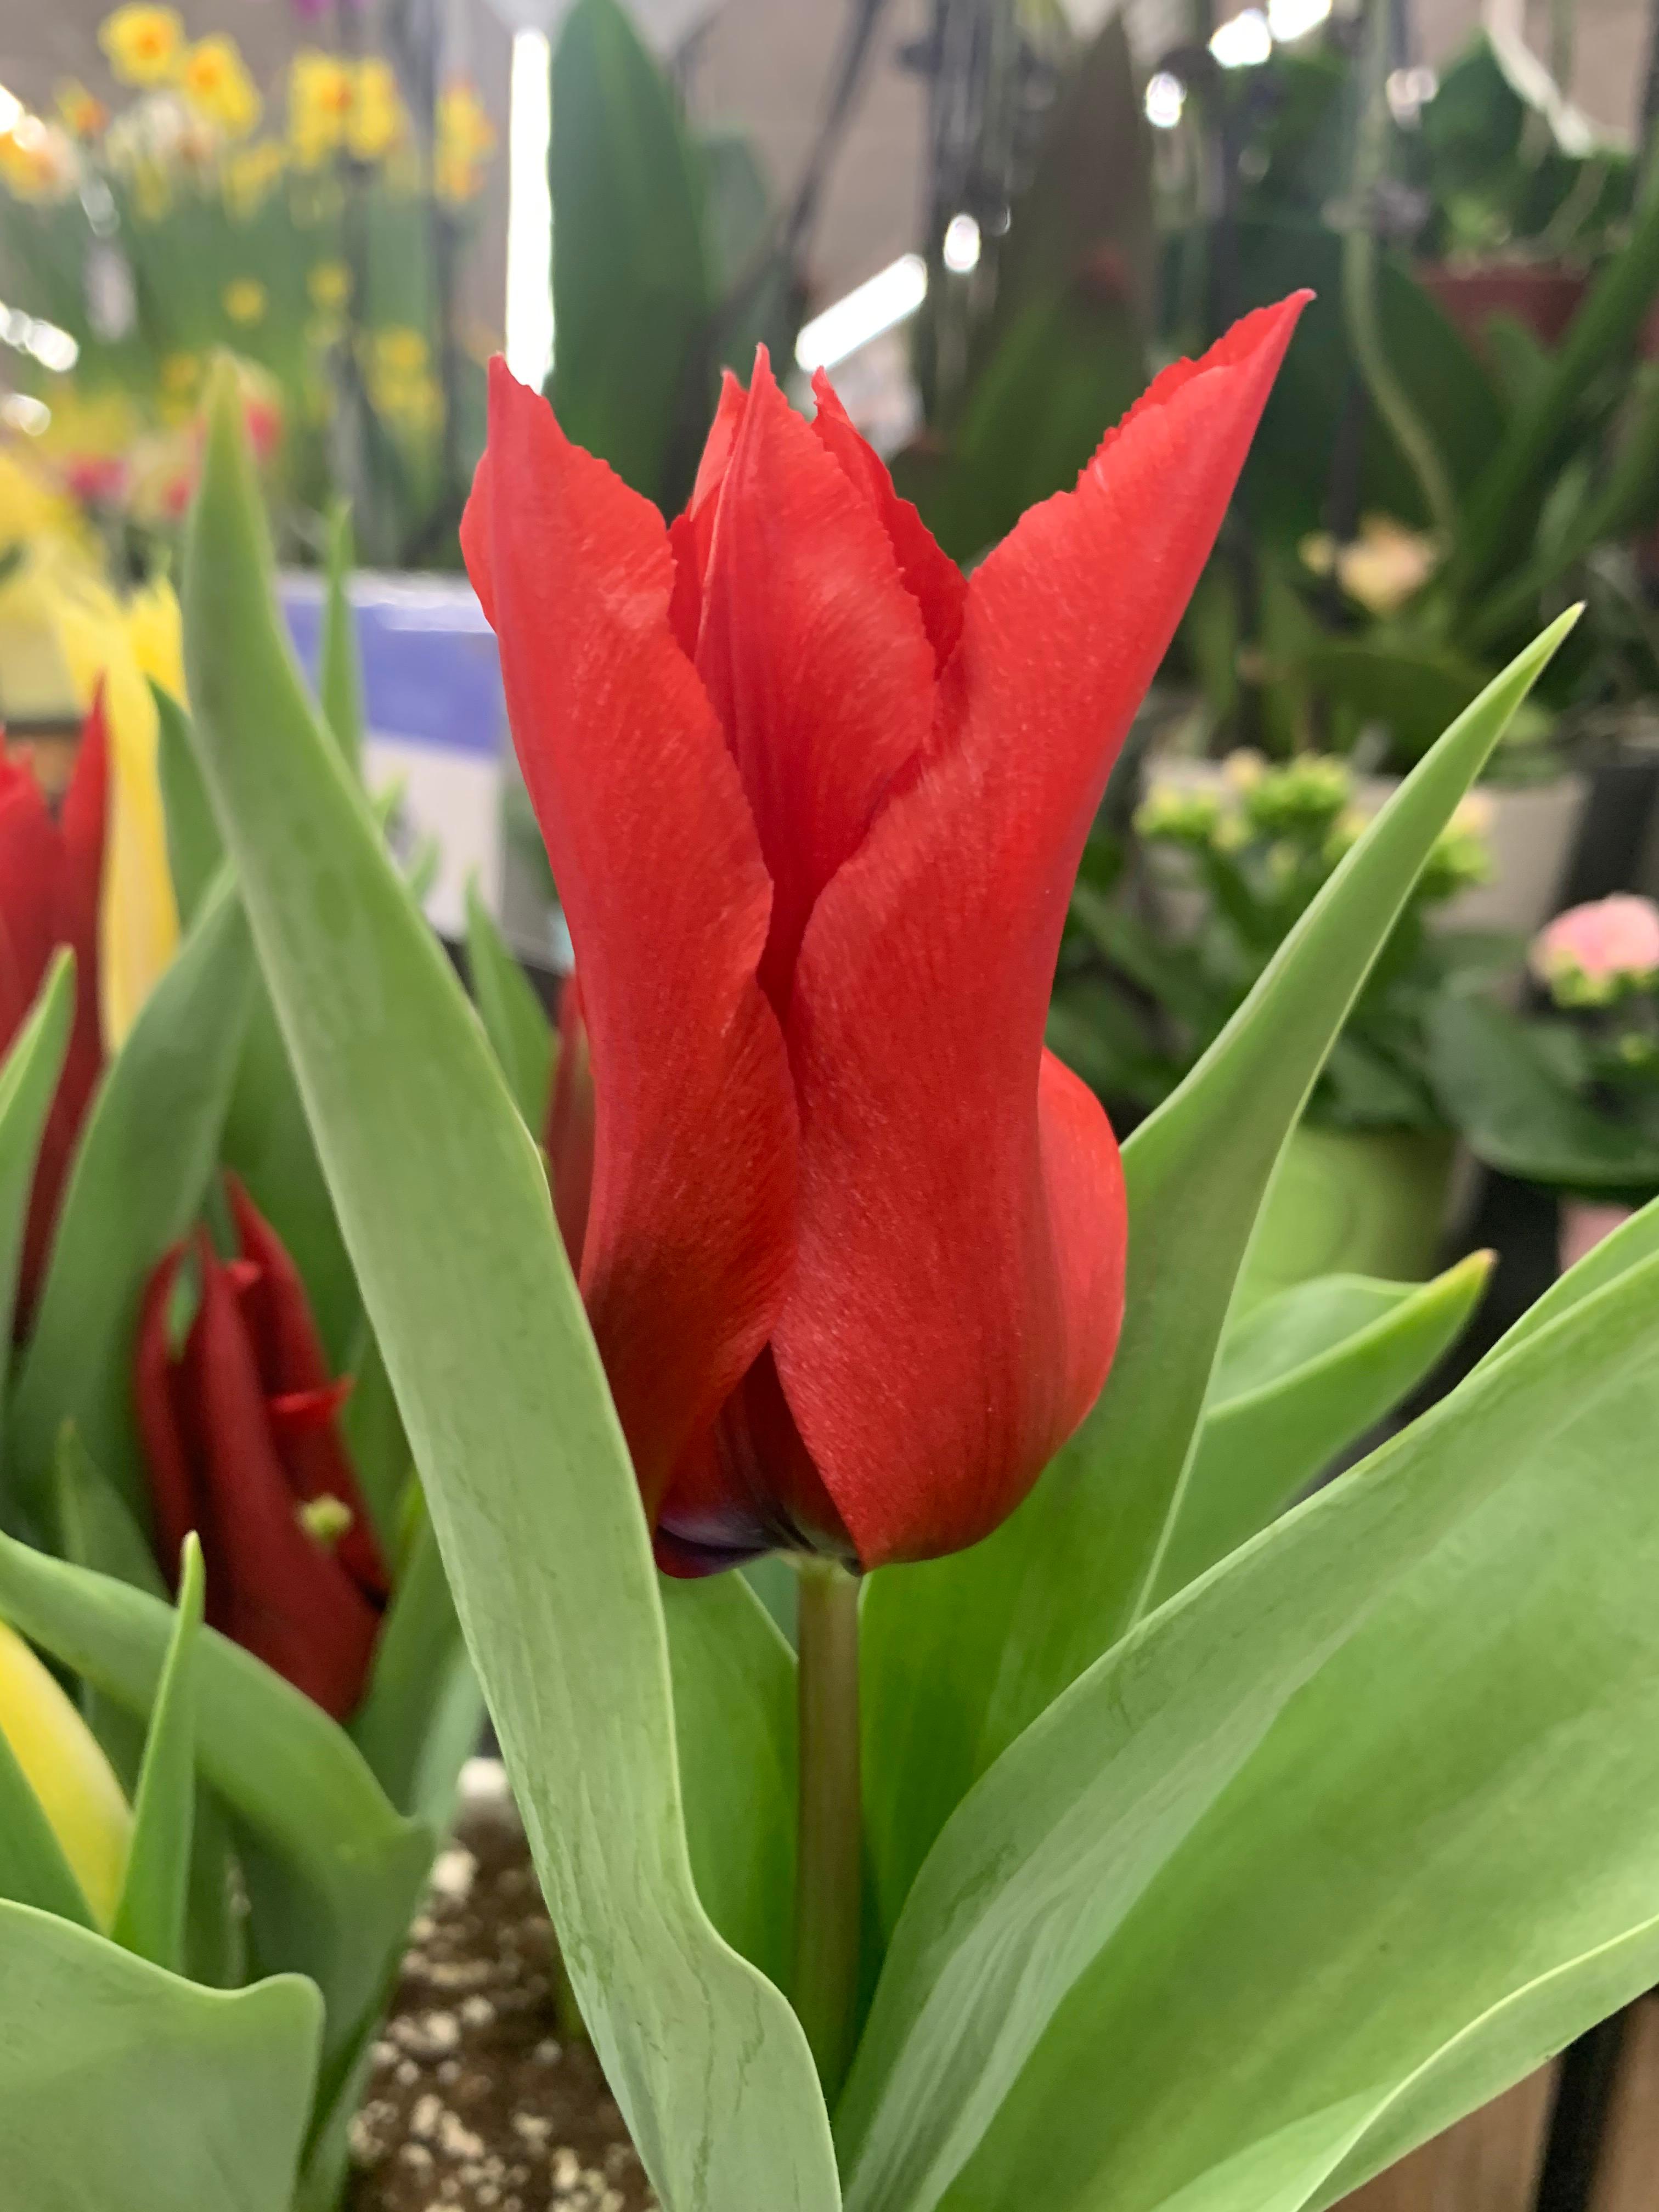 Tulip Lily Flowering 'Red Shine' - Tulip from Leo Berbee Bulb Company